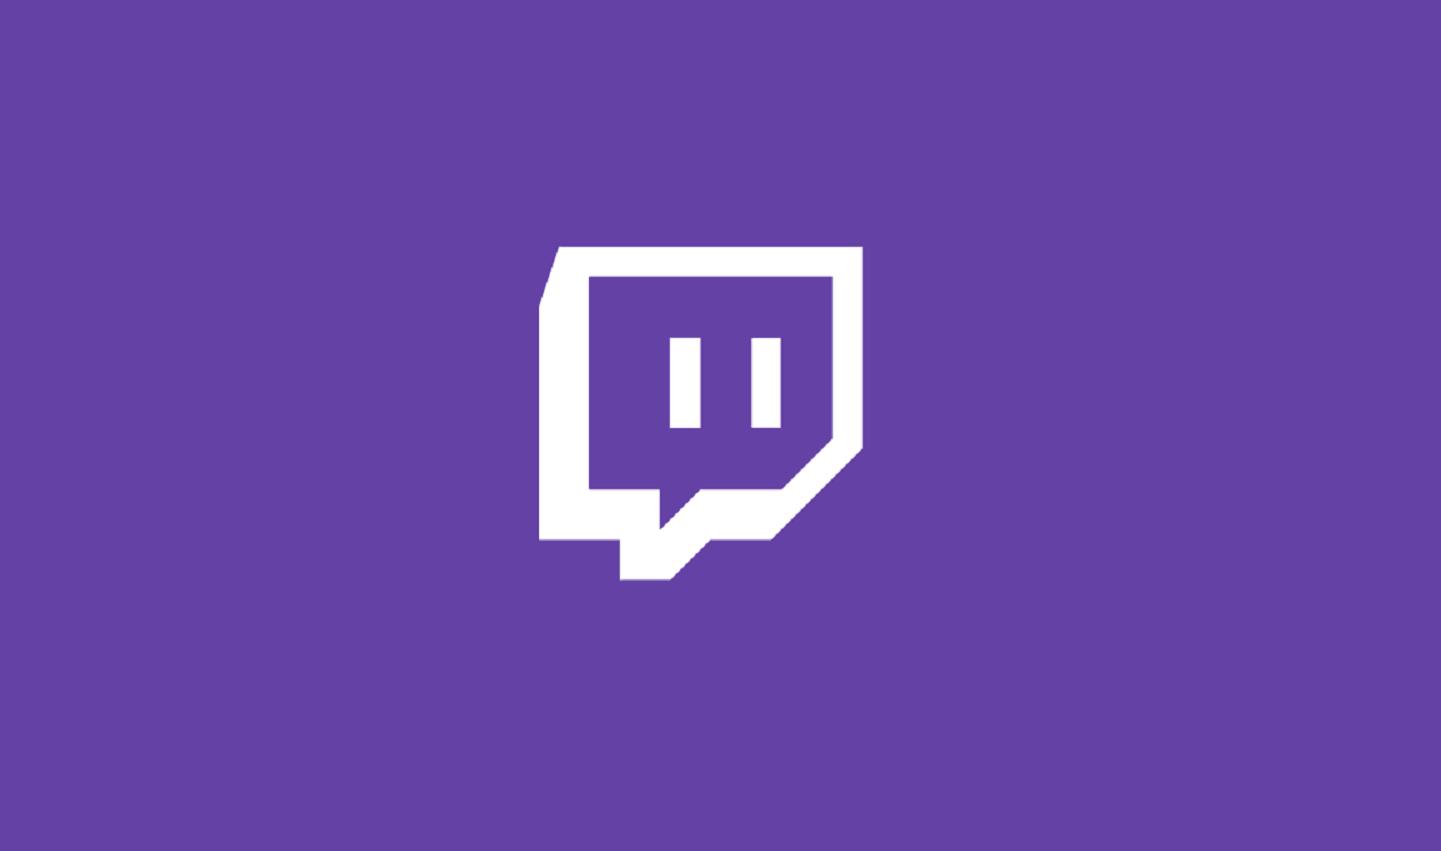 New Twitch Logo - Twitch's new subscription program could significantly increase